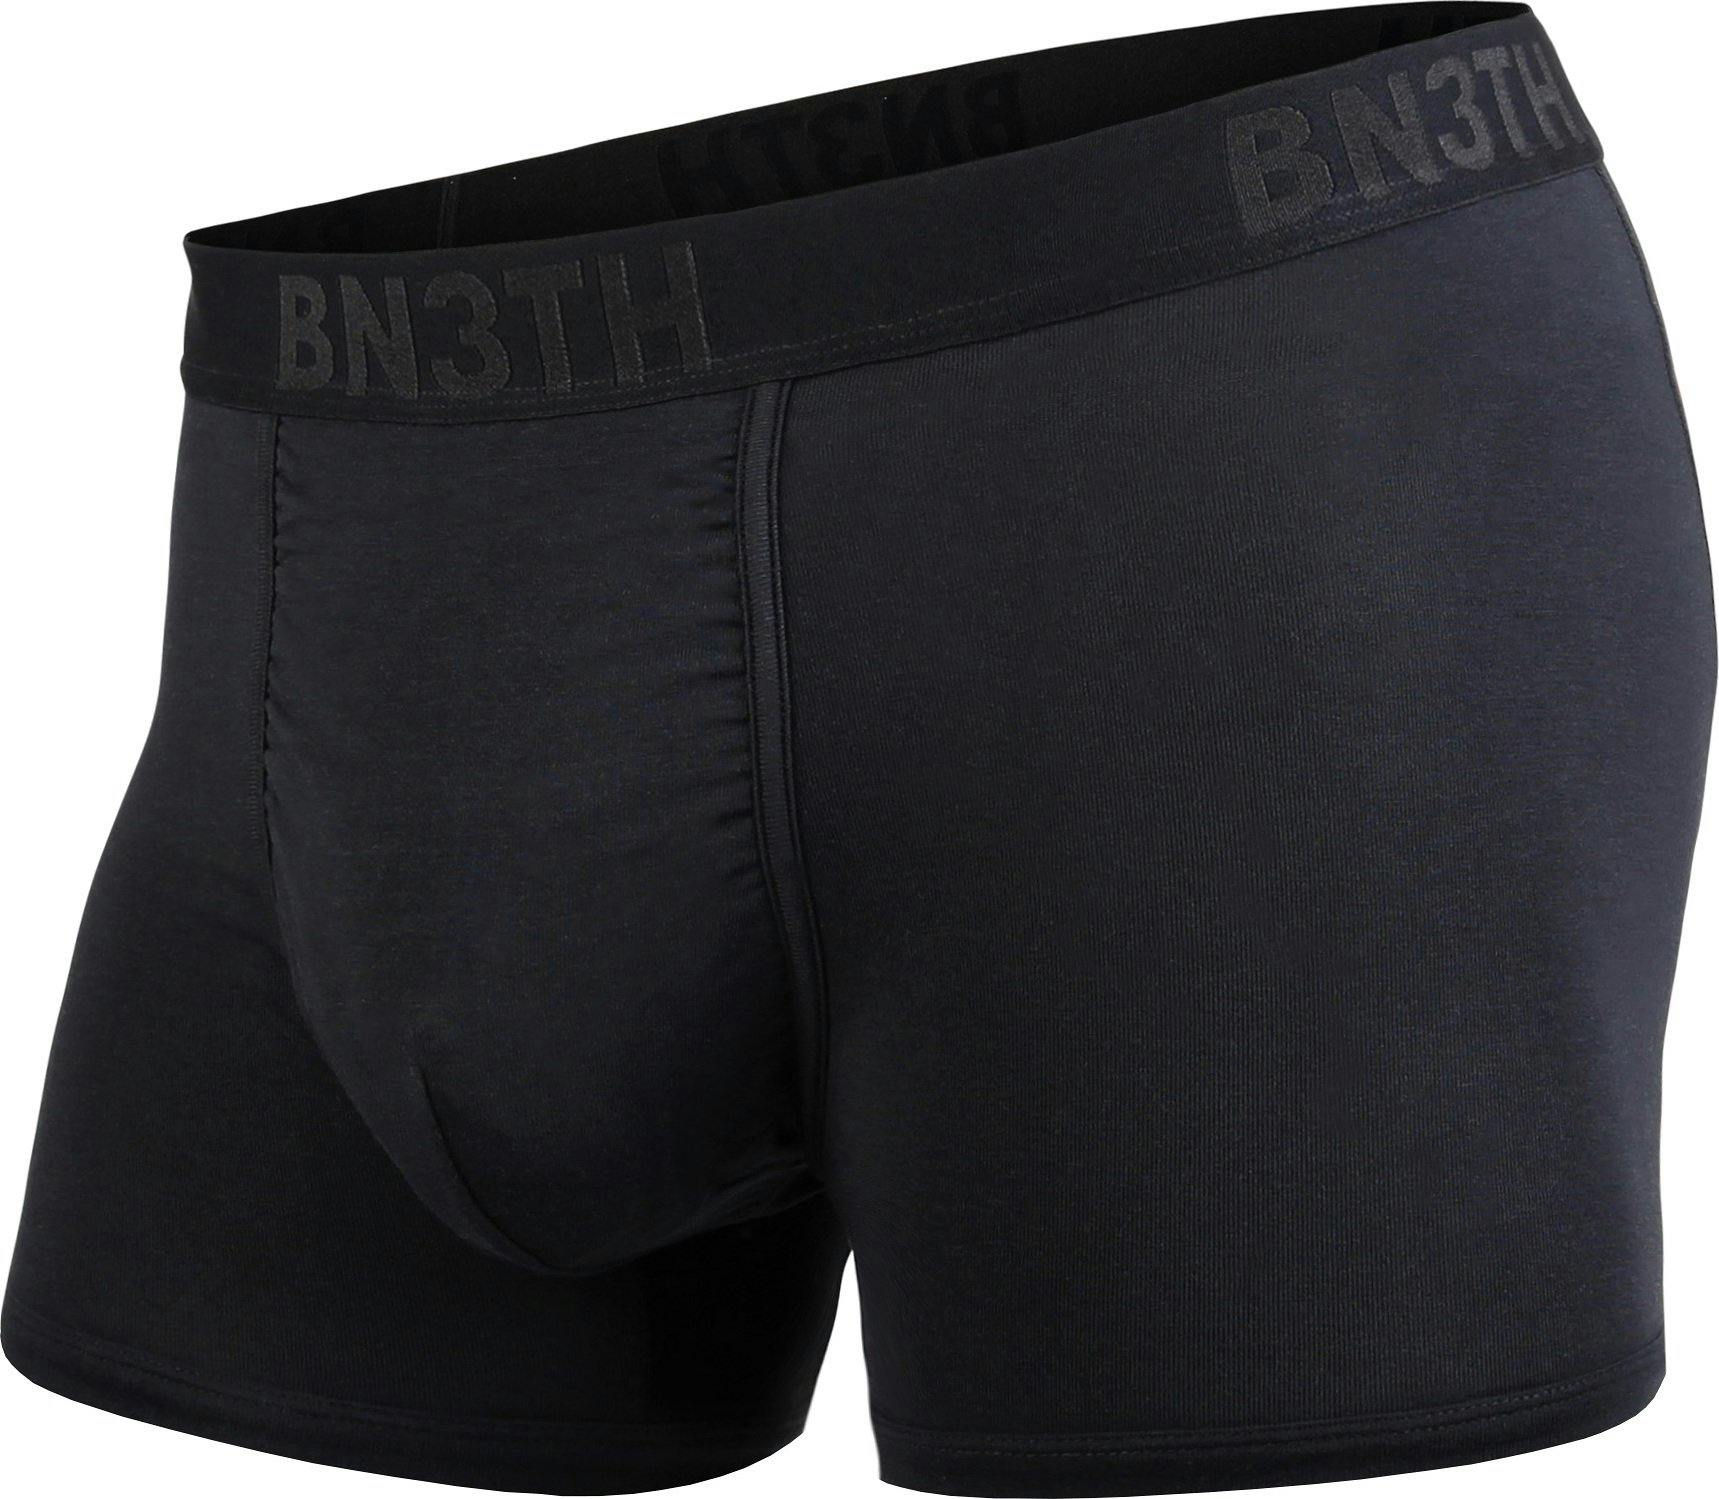 Product image for Classic Trunk Solids - Men's